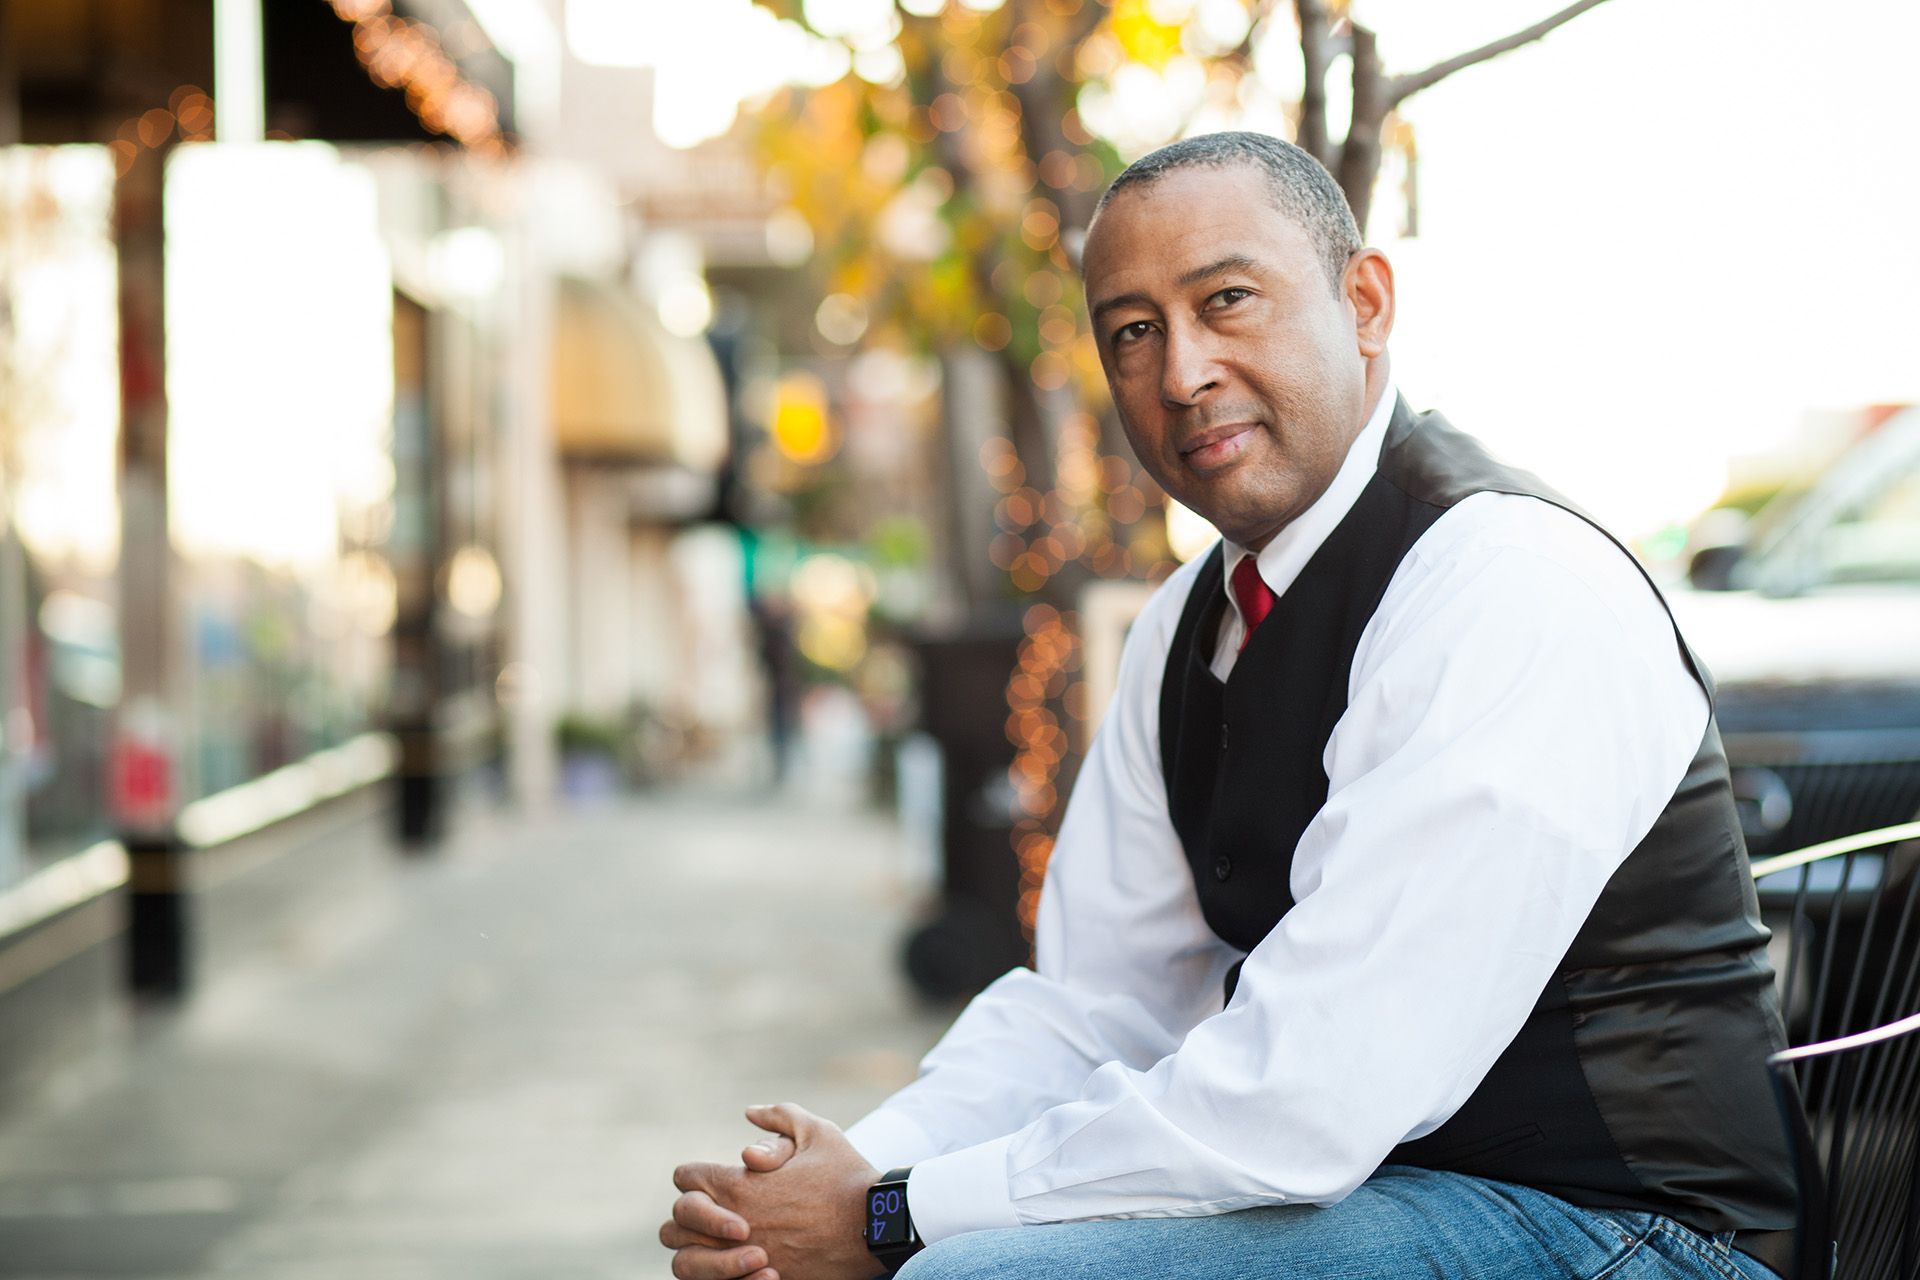 jay ward sitting in a cafe chair in downtown san francisco. he is wearing a white button-down shirt, red tie, black vest, and jeans.